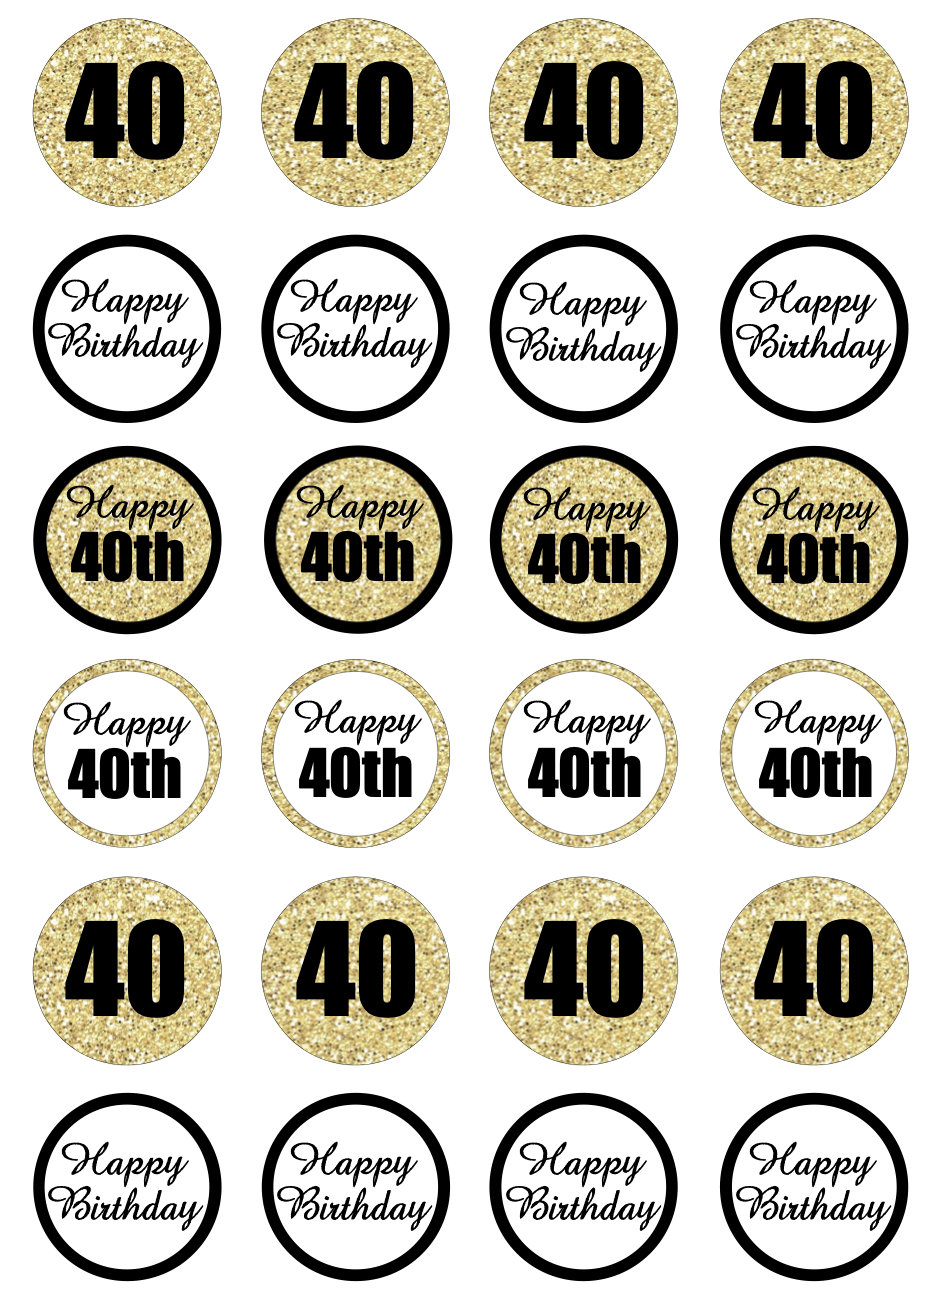 40th Birthday Black & Gold Cupcake Edible Icing Image Toppers ...